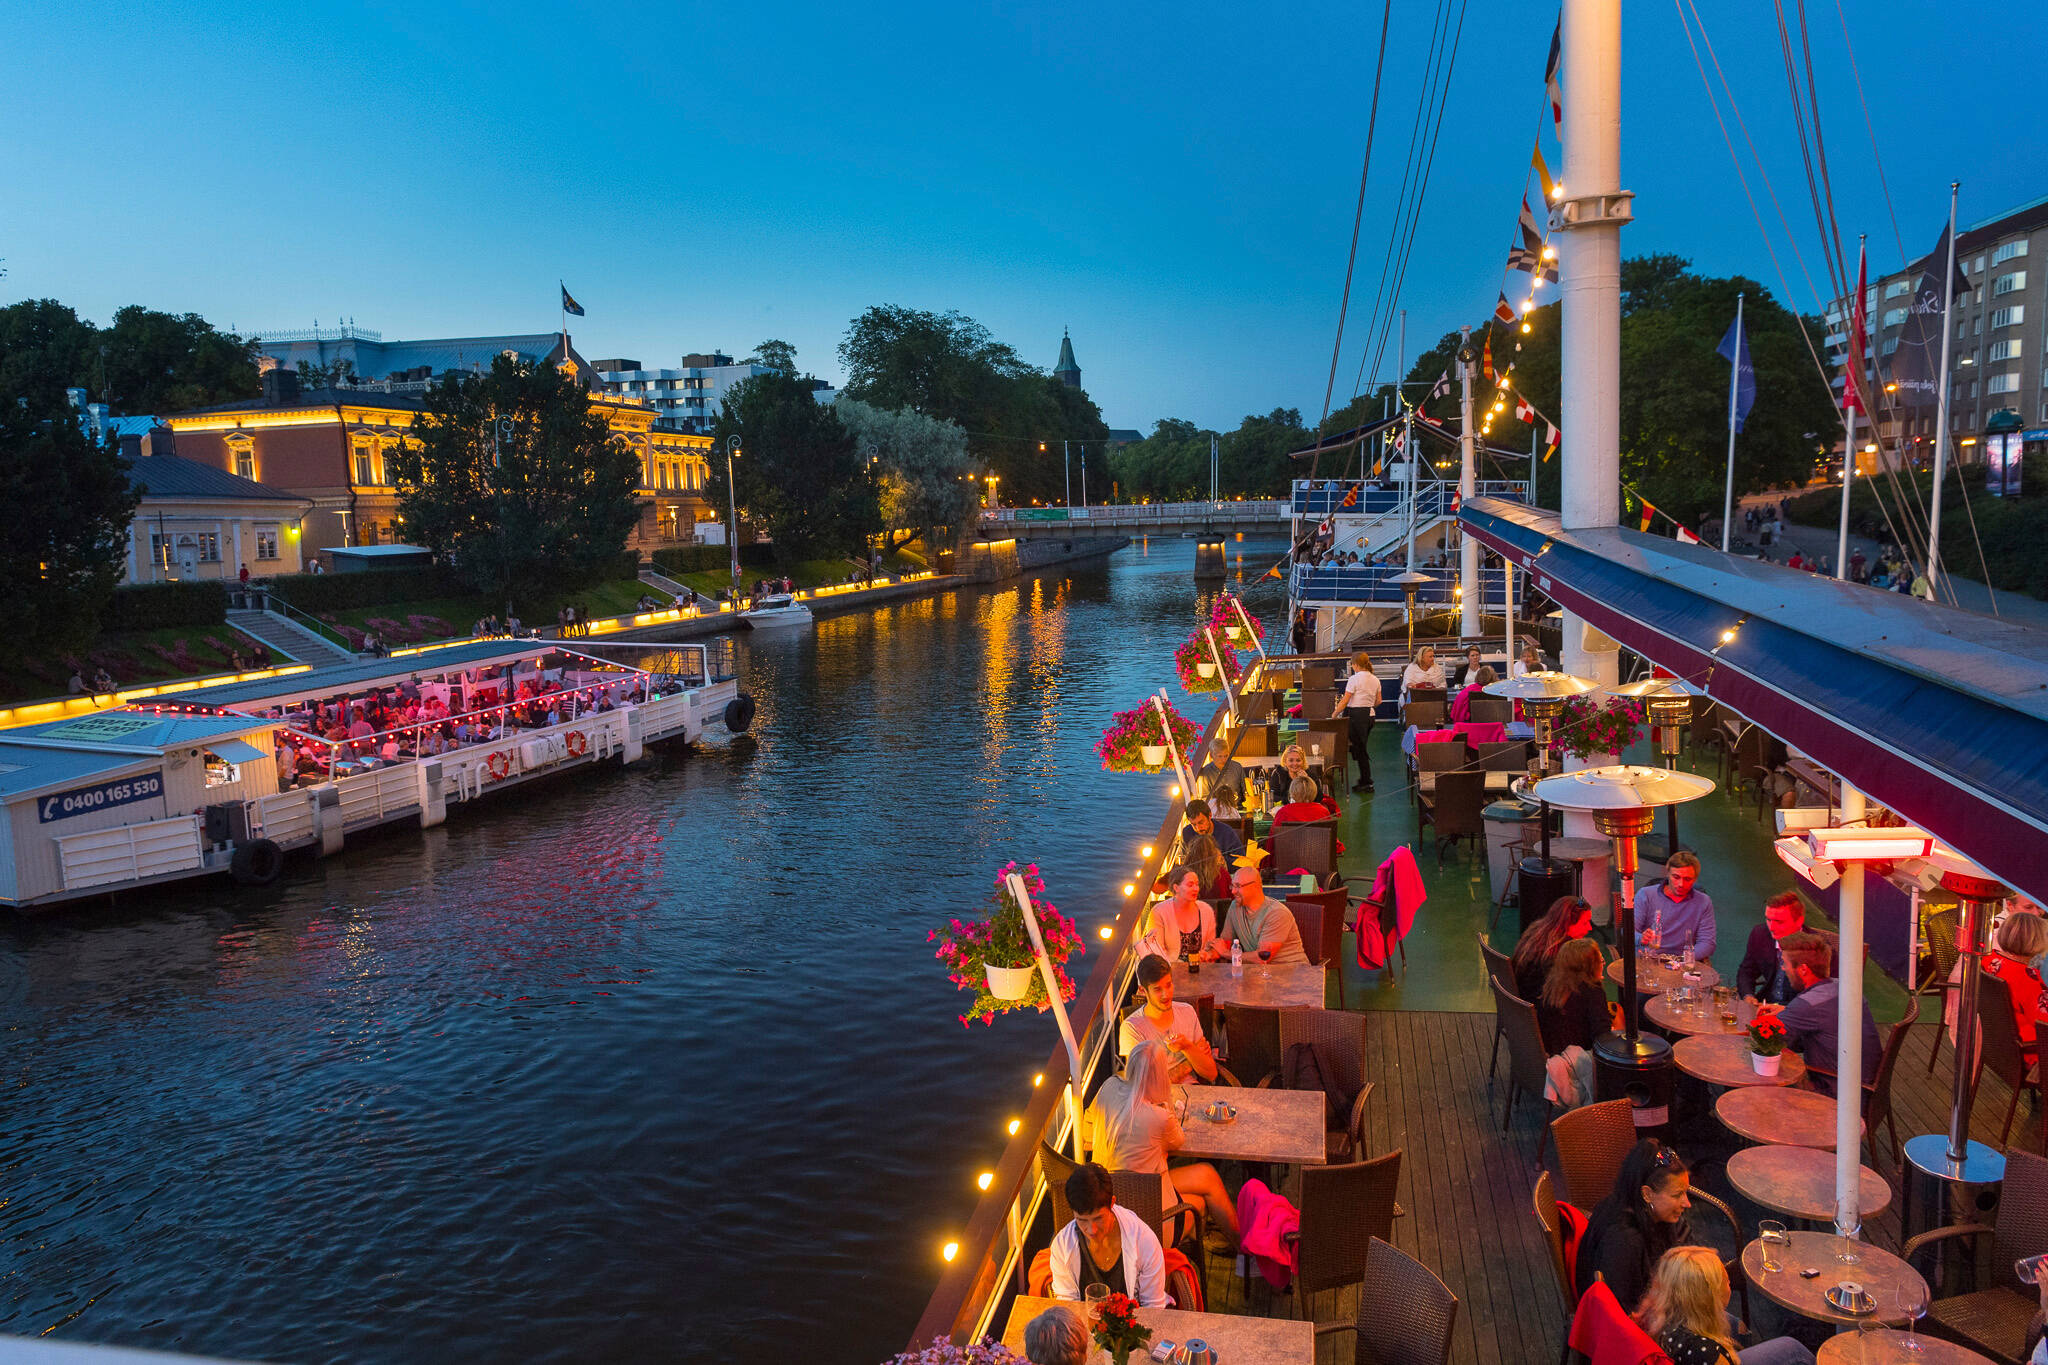 Restaurant boats by the Aura River in Turku, Finland